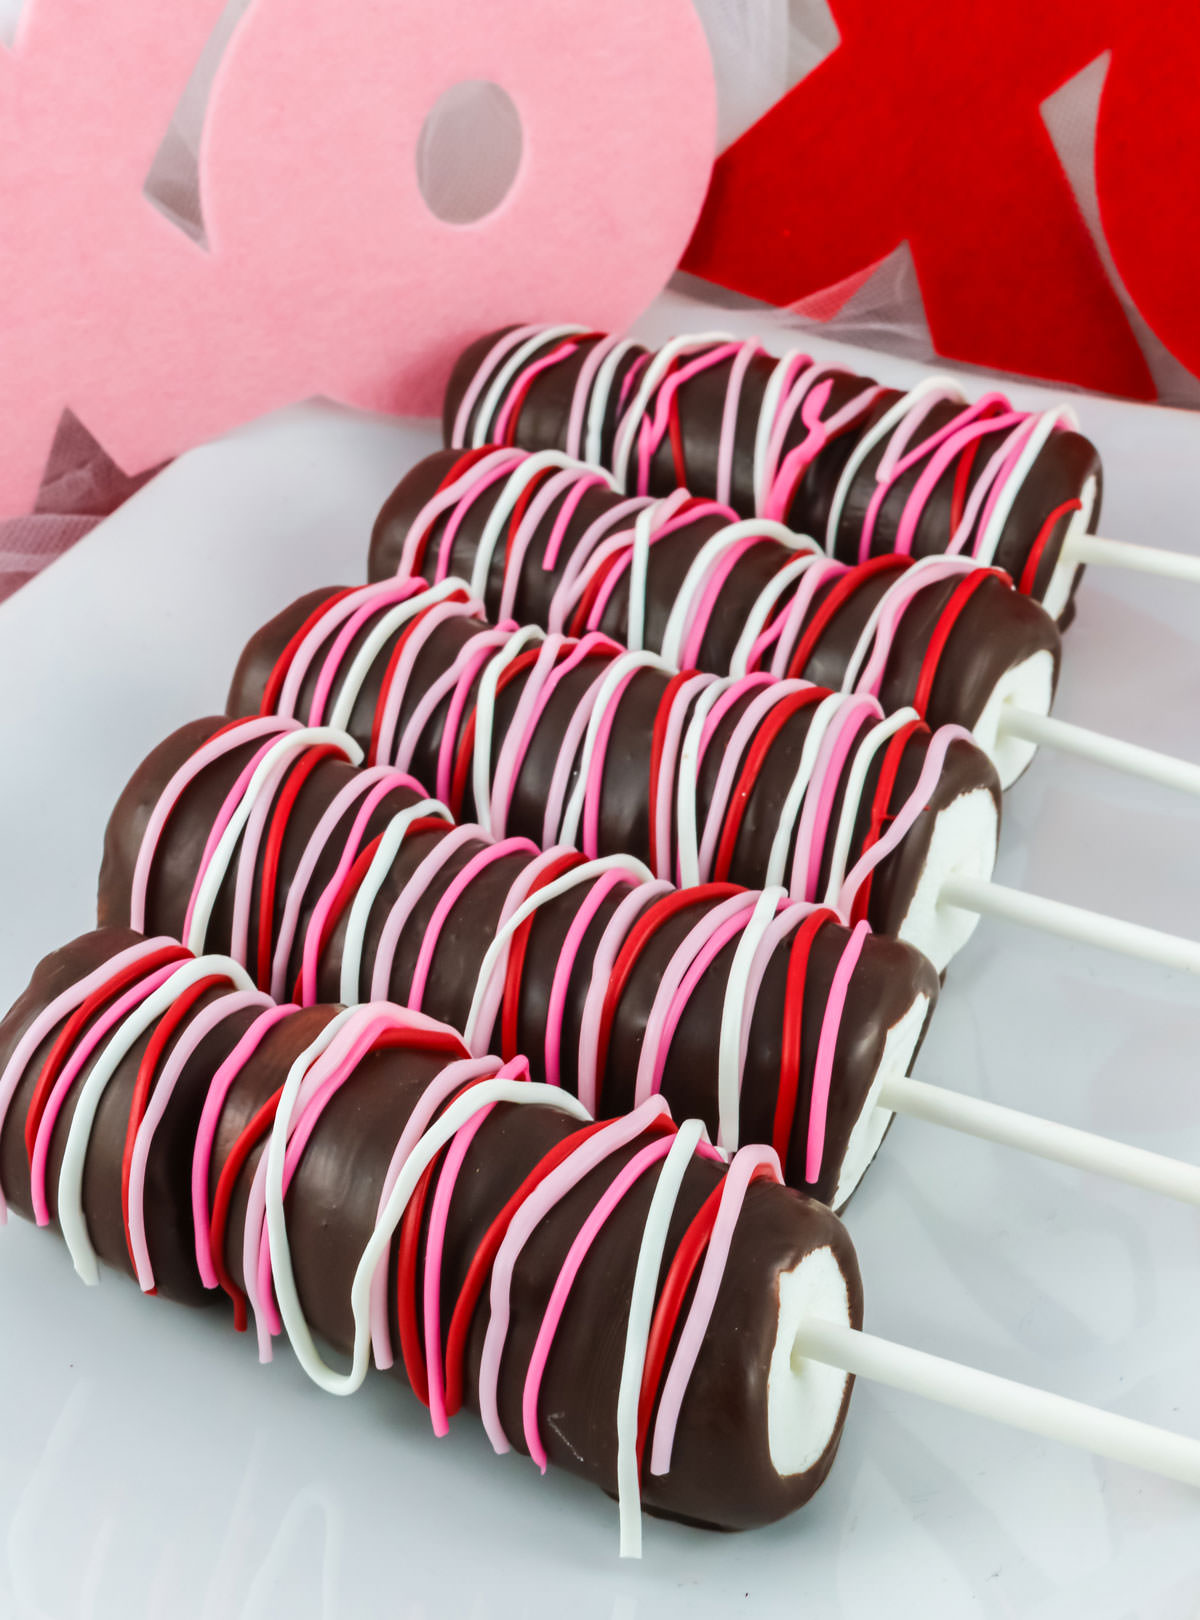 5 Valentine's Marshmallow Pops laying on a white serving platter in from of an XOXO Valentine's Day Decoration.